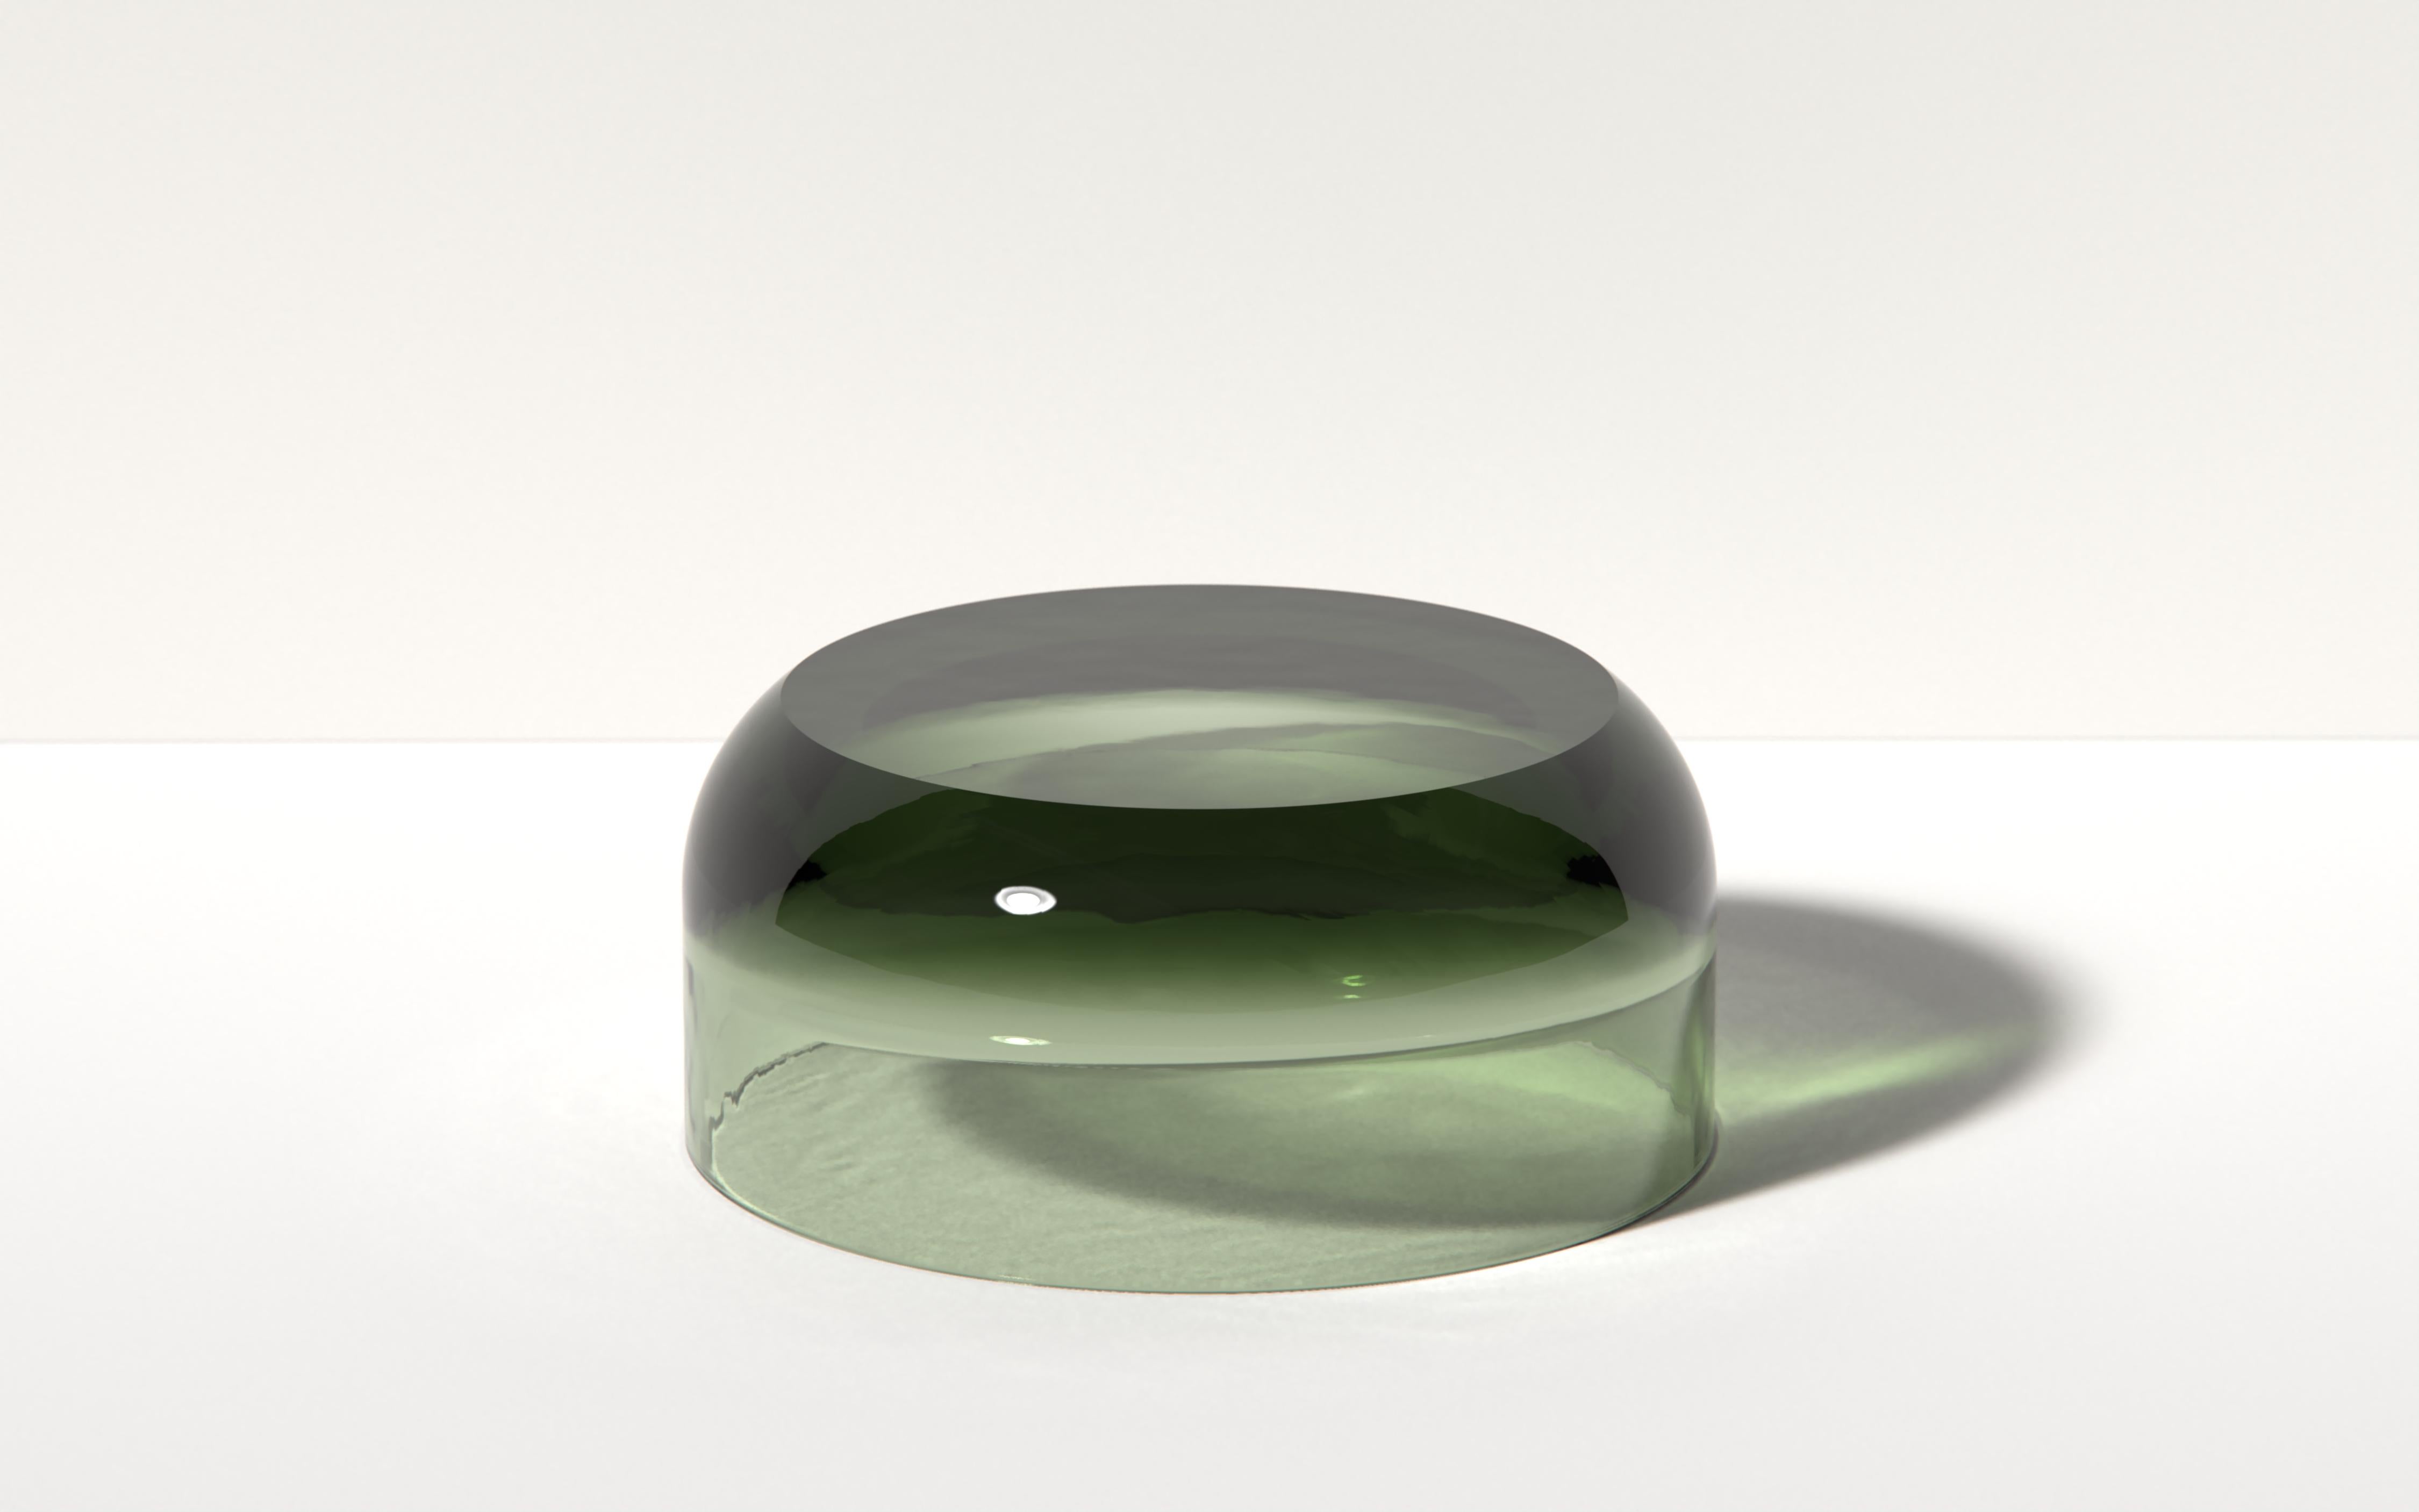 Big Dew Drop Resin Side Table, Ian Cochran, Represented by Tuleste Factory For Sale 3